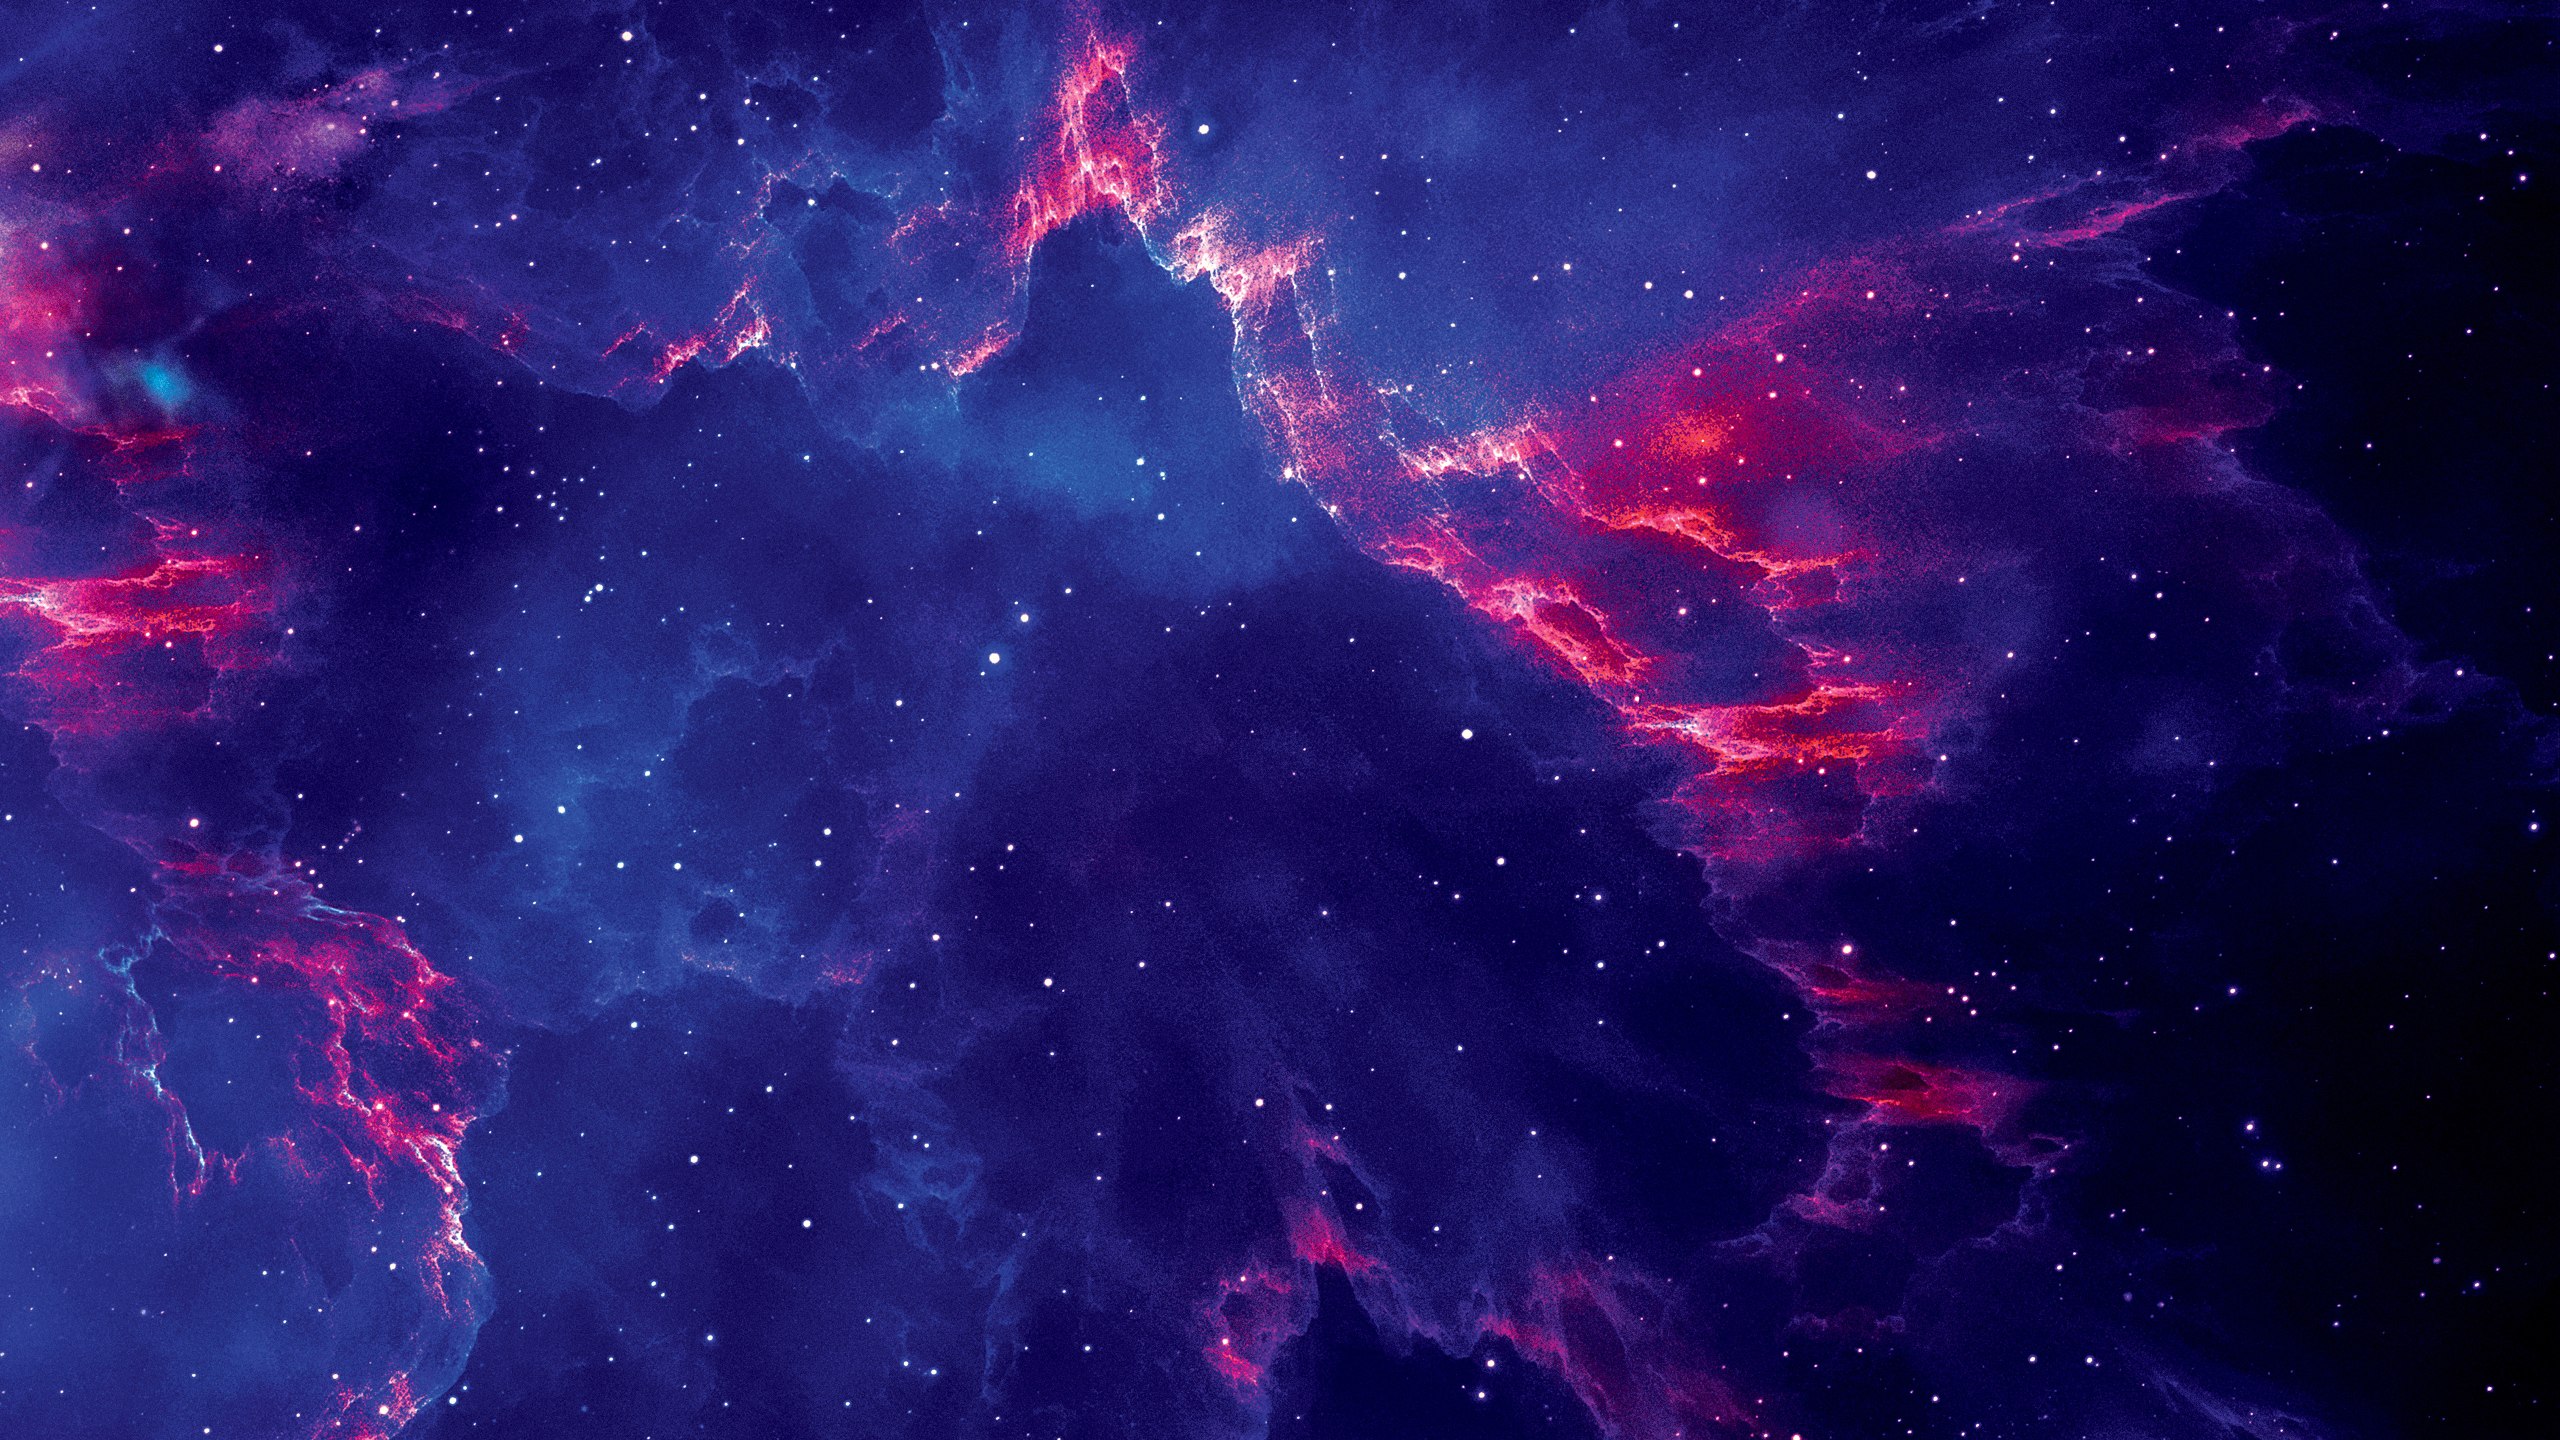 2560x1440 Starry Galaxy 1440p Resolution Background Hd Artist 4k Wallpapers Images Photos And Background